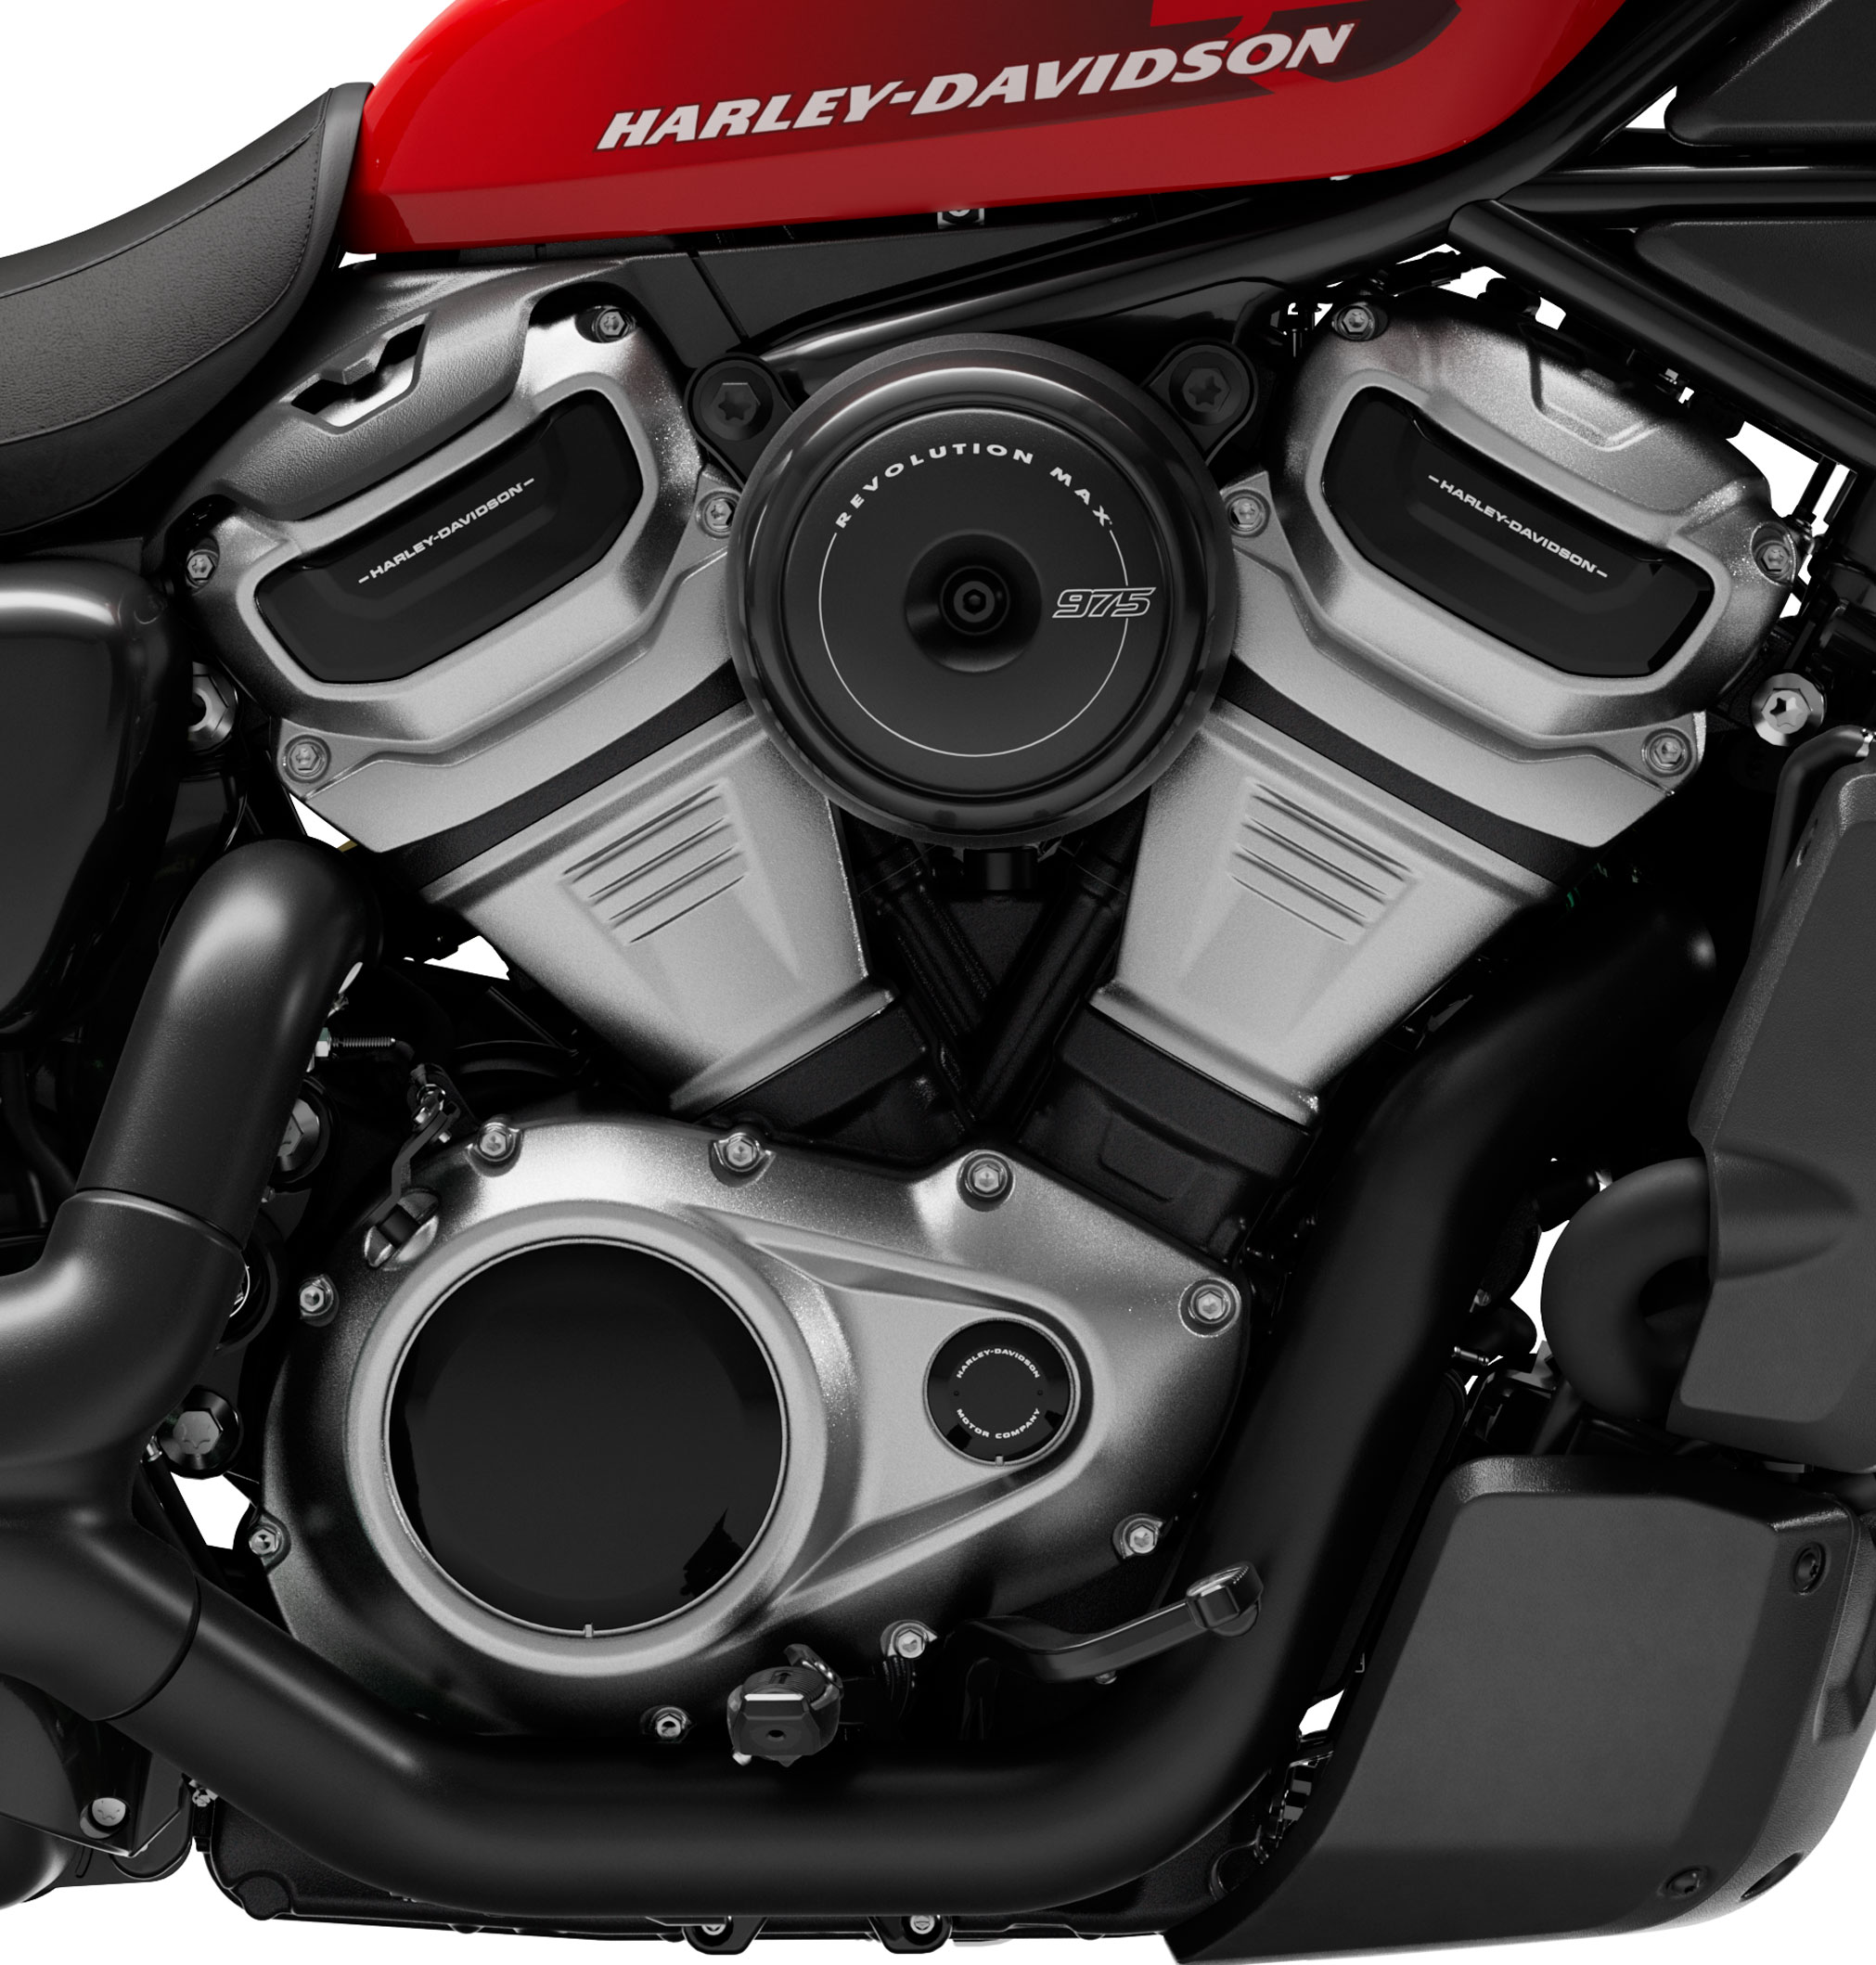 Harley-Davidson Revolution Max 975T Engine First Look: 8 Fast Facts